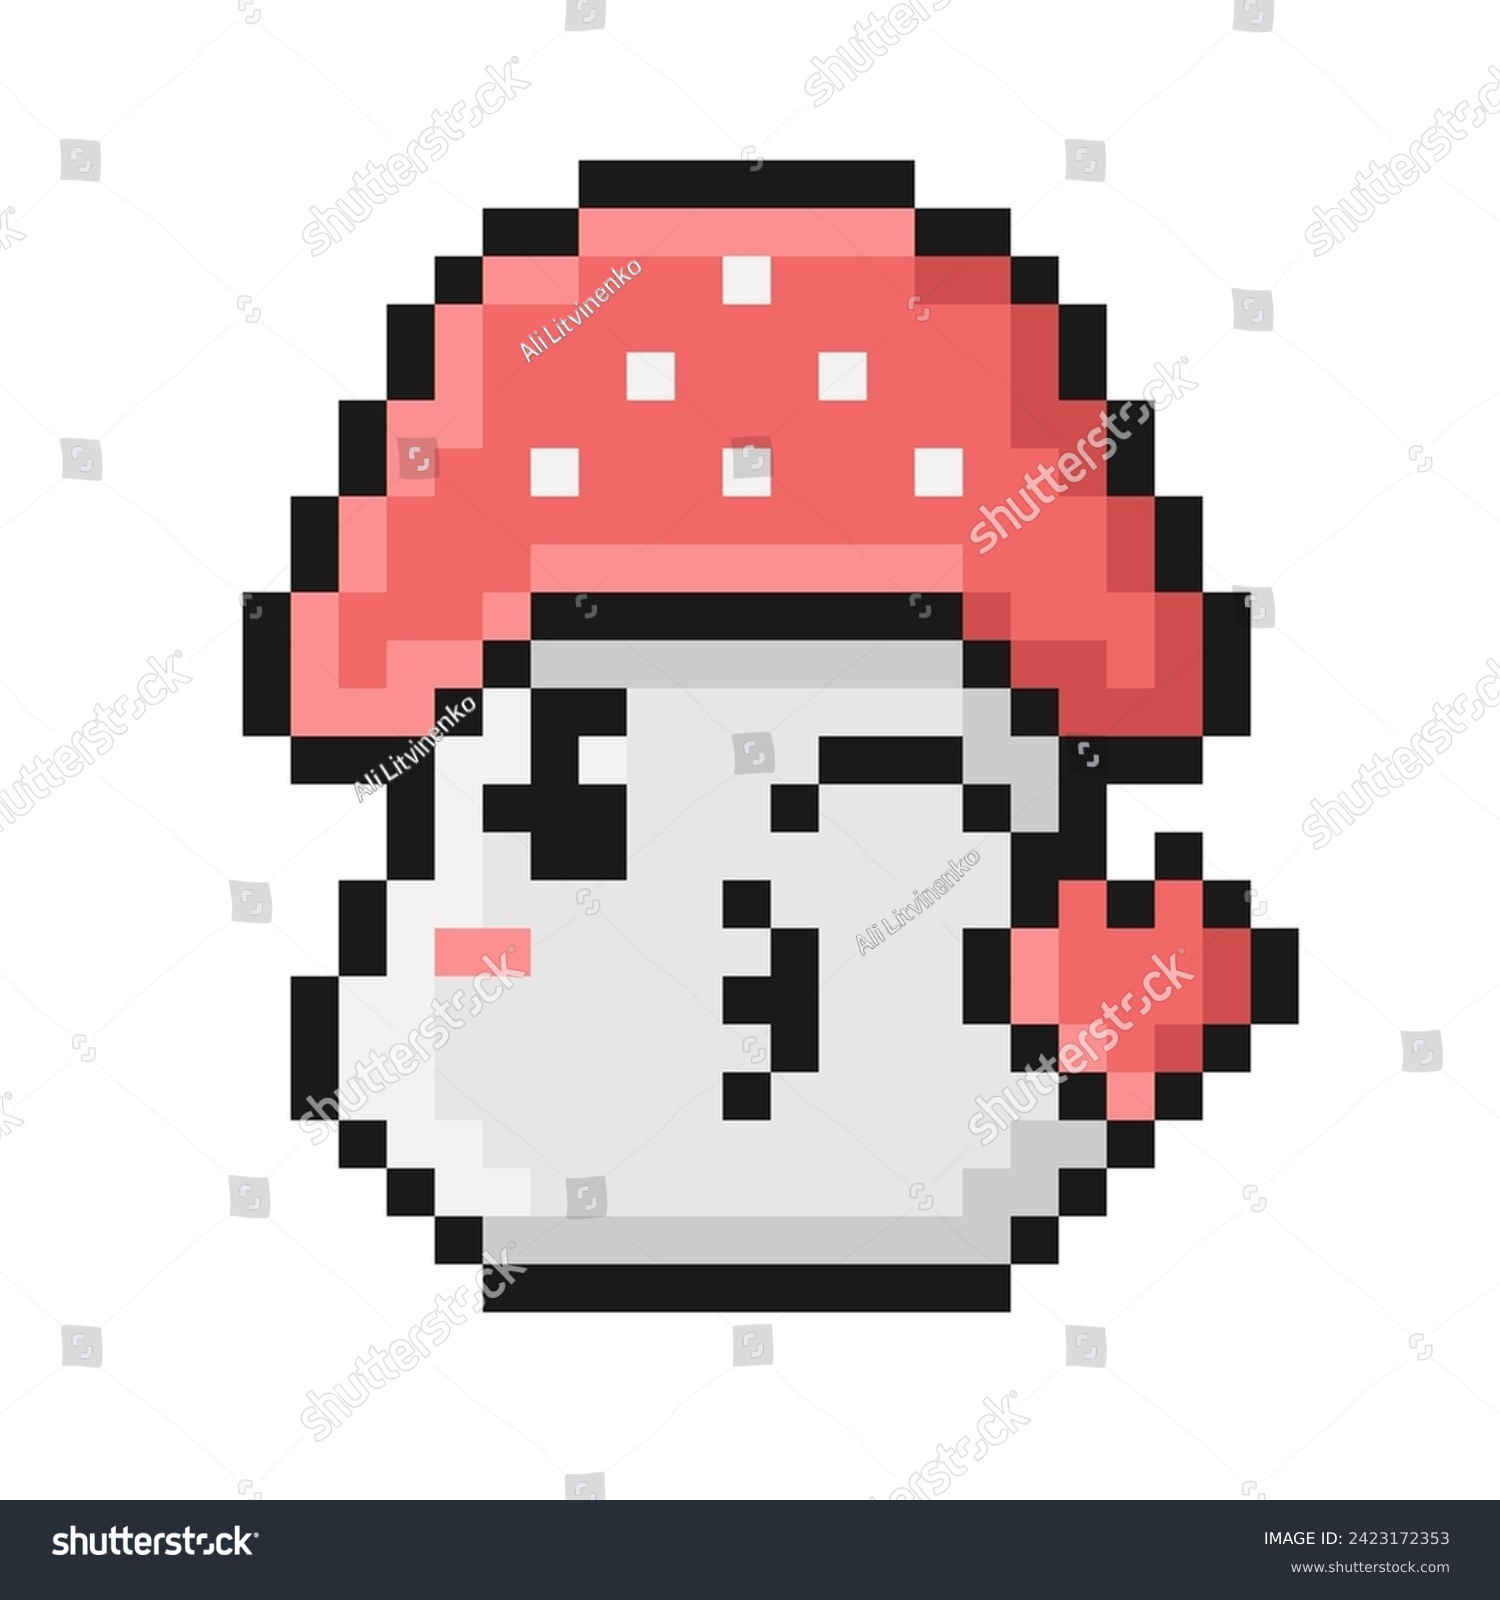 SVG of Pixel style fly agaric mushroom. Face Blowing a Kiss. Cartoon smile funny face. 90s retro video game aesthetic. Emoji convey feelings of love and affection. Pixelated vintage nostalgic 8 bit design. svg